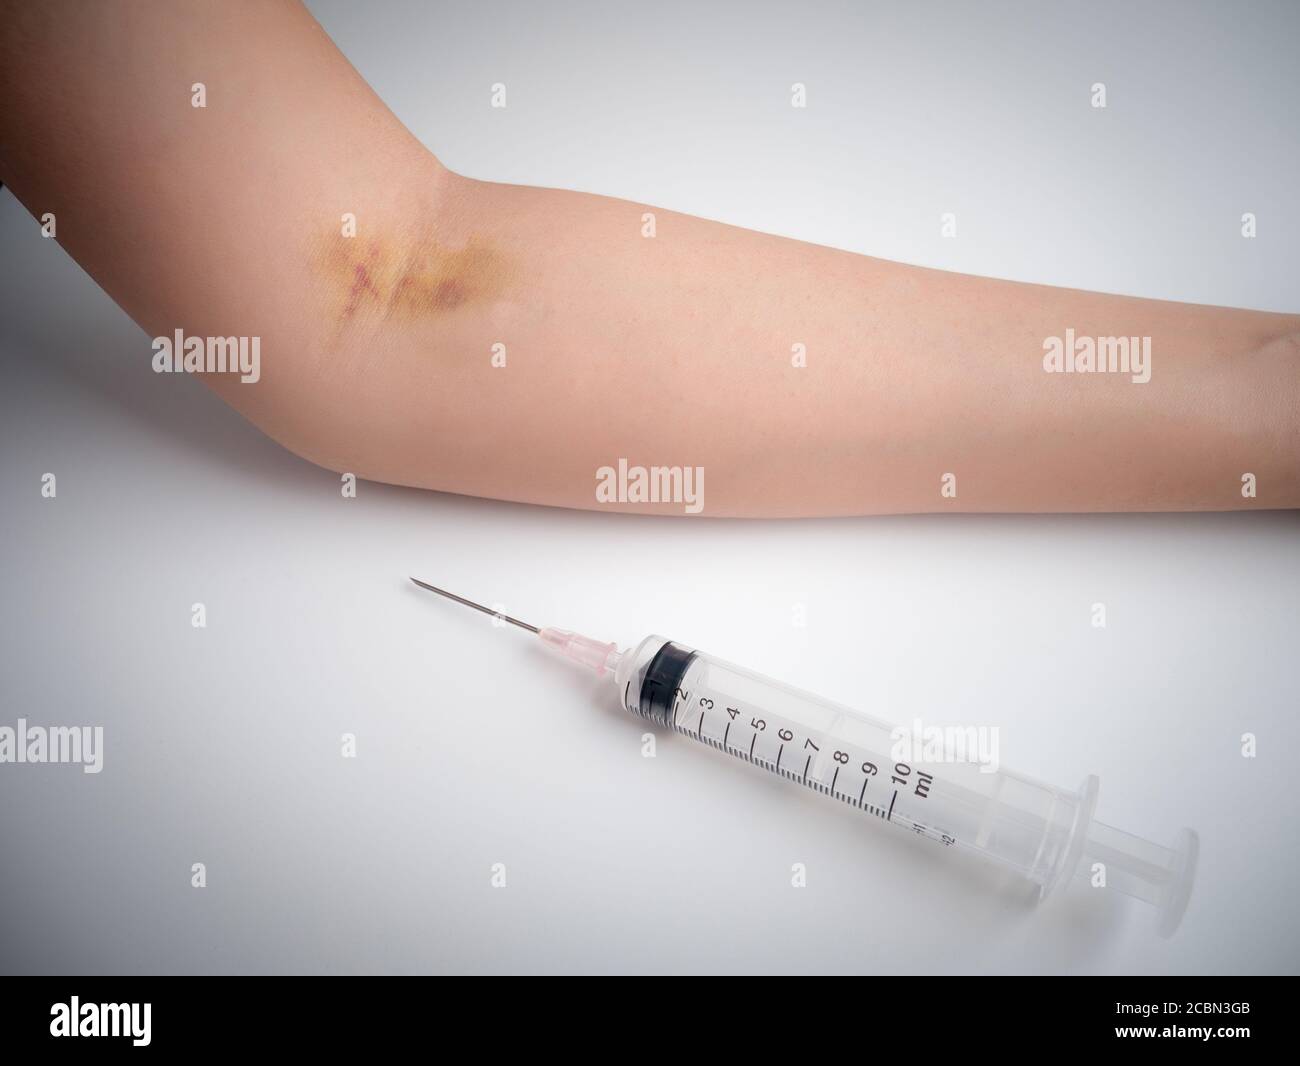 syringe , injection needle on the table and close up arm with bruise effect from frequent injection Stock Photo